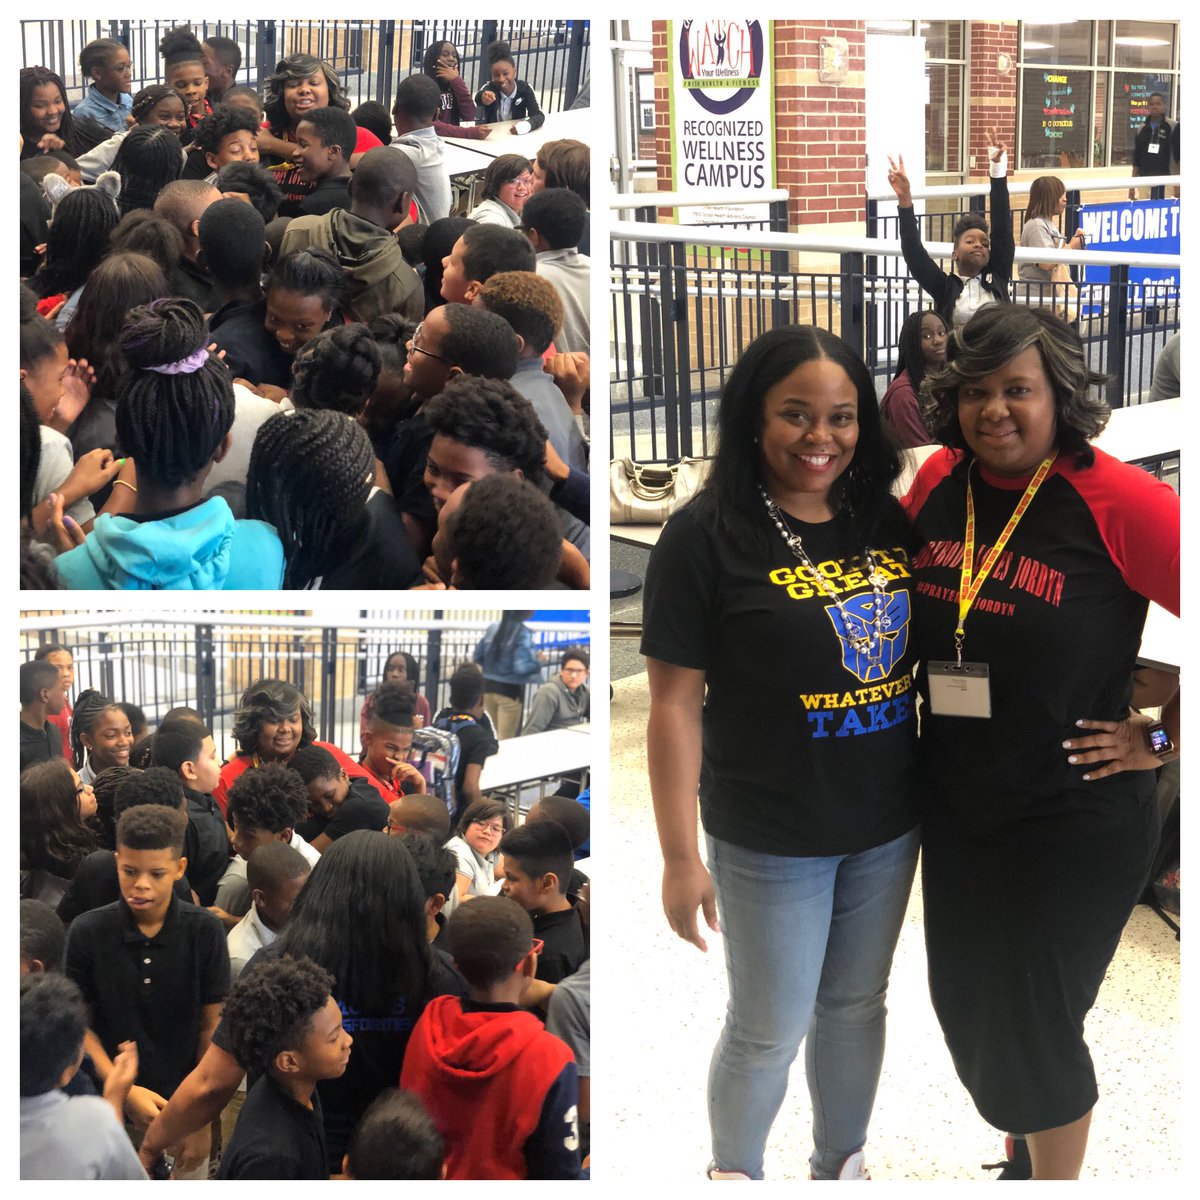 What an amazing moment! @MCMSCoogs show love to former student Jordyn Hawkins mom and raised over $1300 to support the family!! @SFAHS_Bulldogs @FortBendISD 
#compassionatecitizen #profileofagraduate